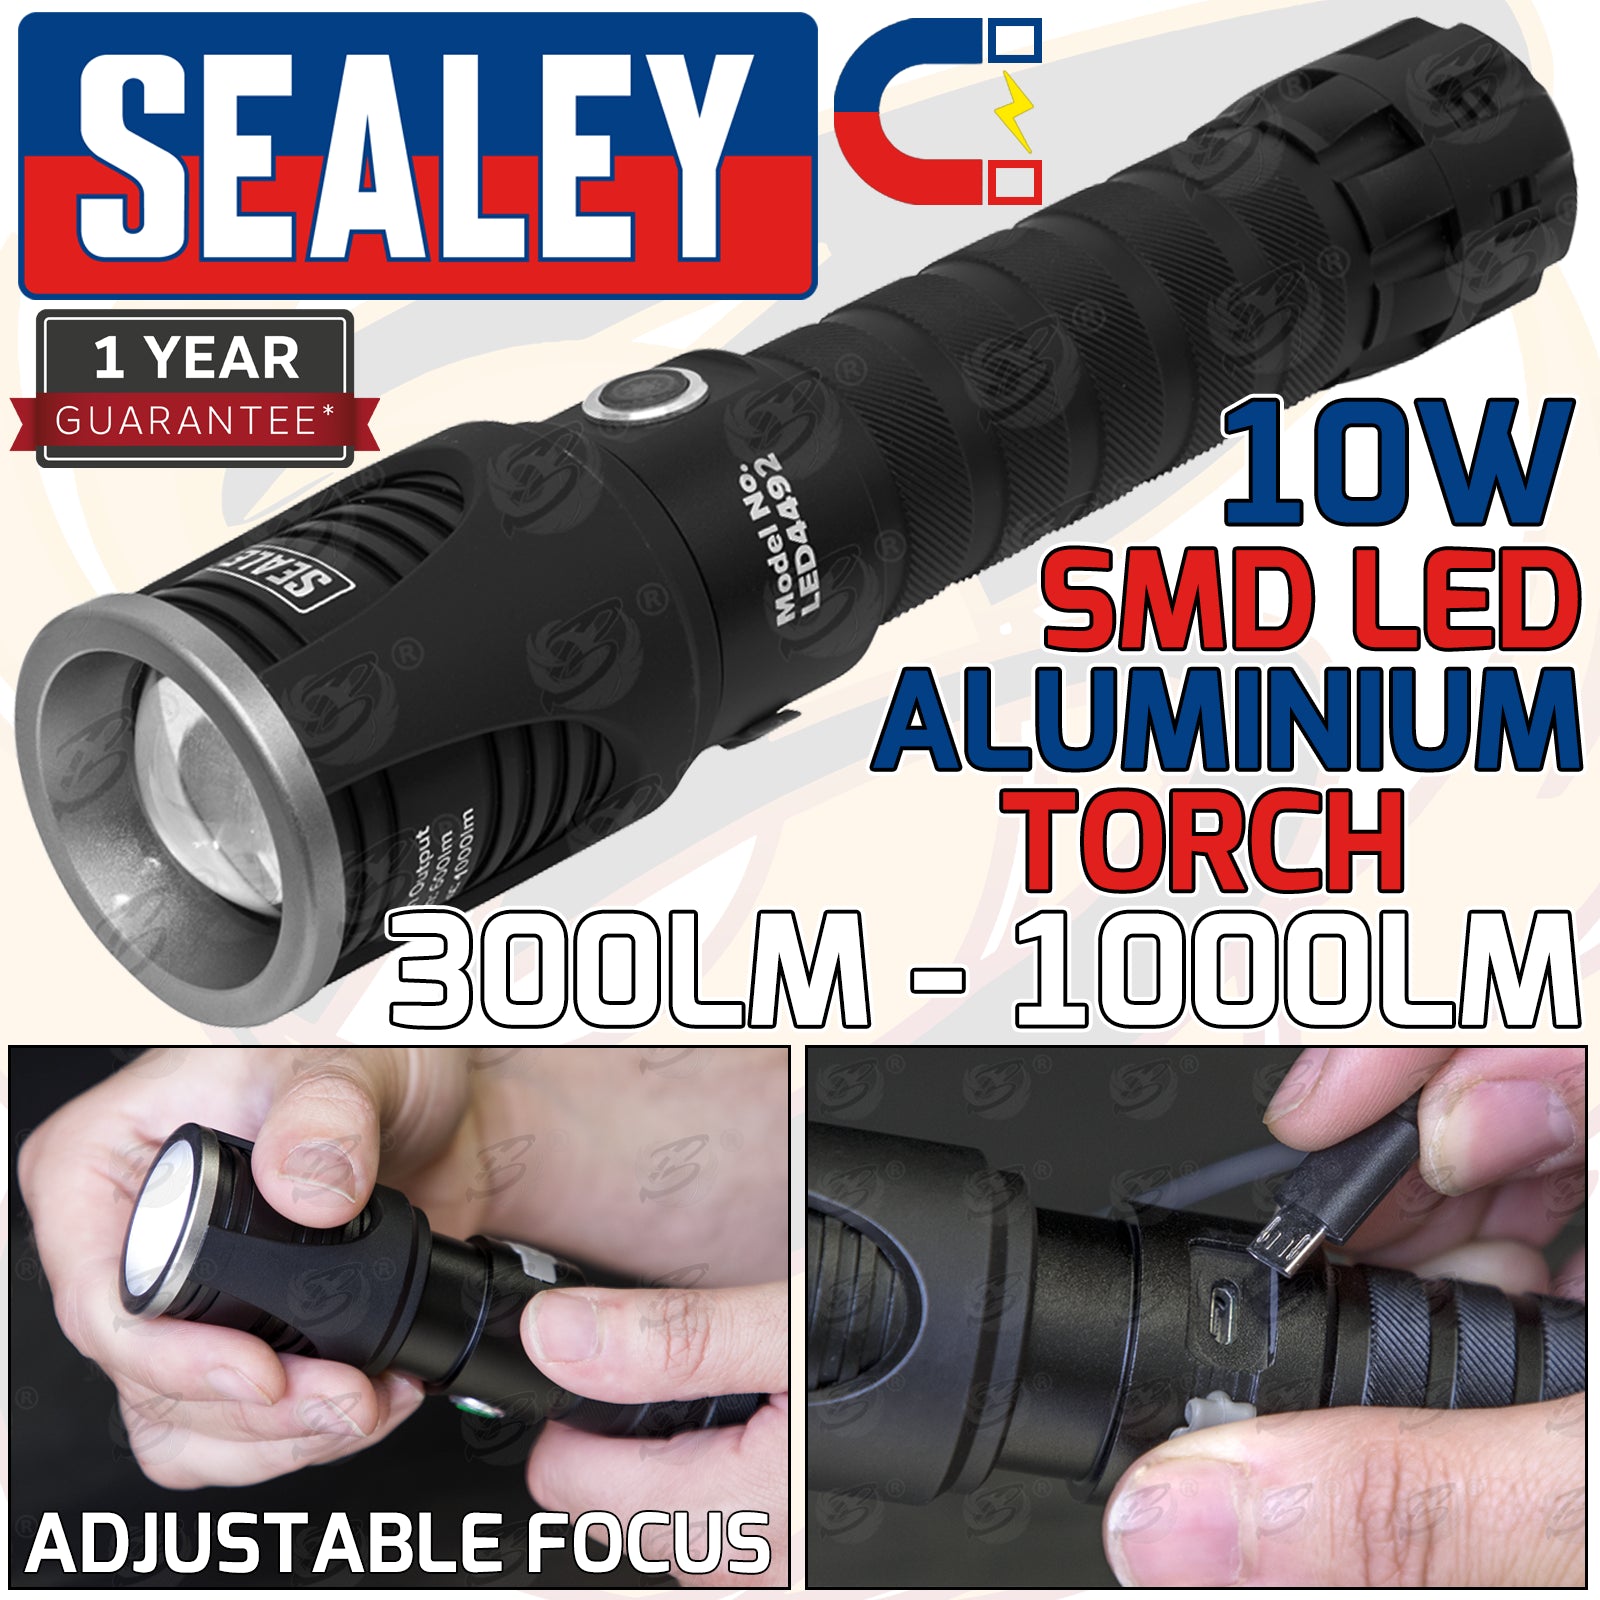 SEALEY RECHARGEABLE LI - ION SMD LED TORCH 10W 300LM - 1000LM